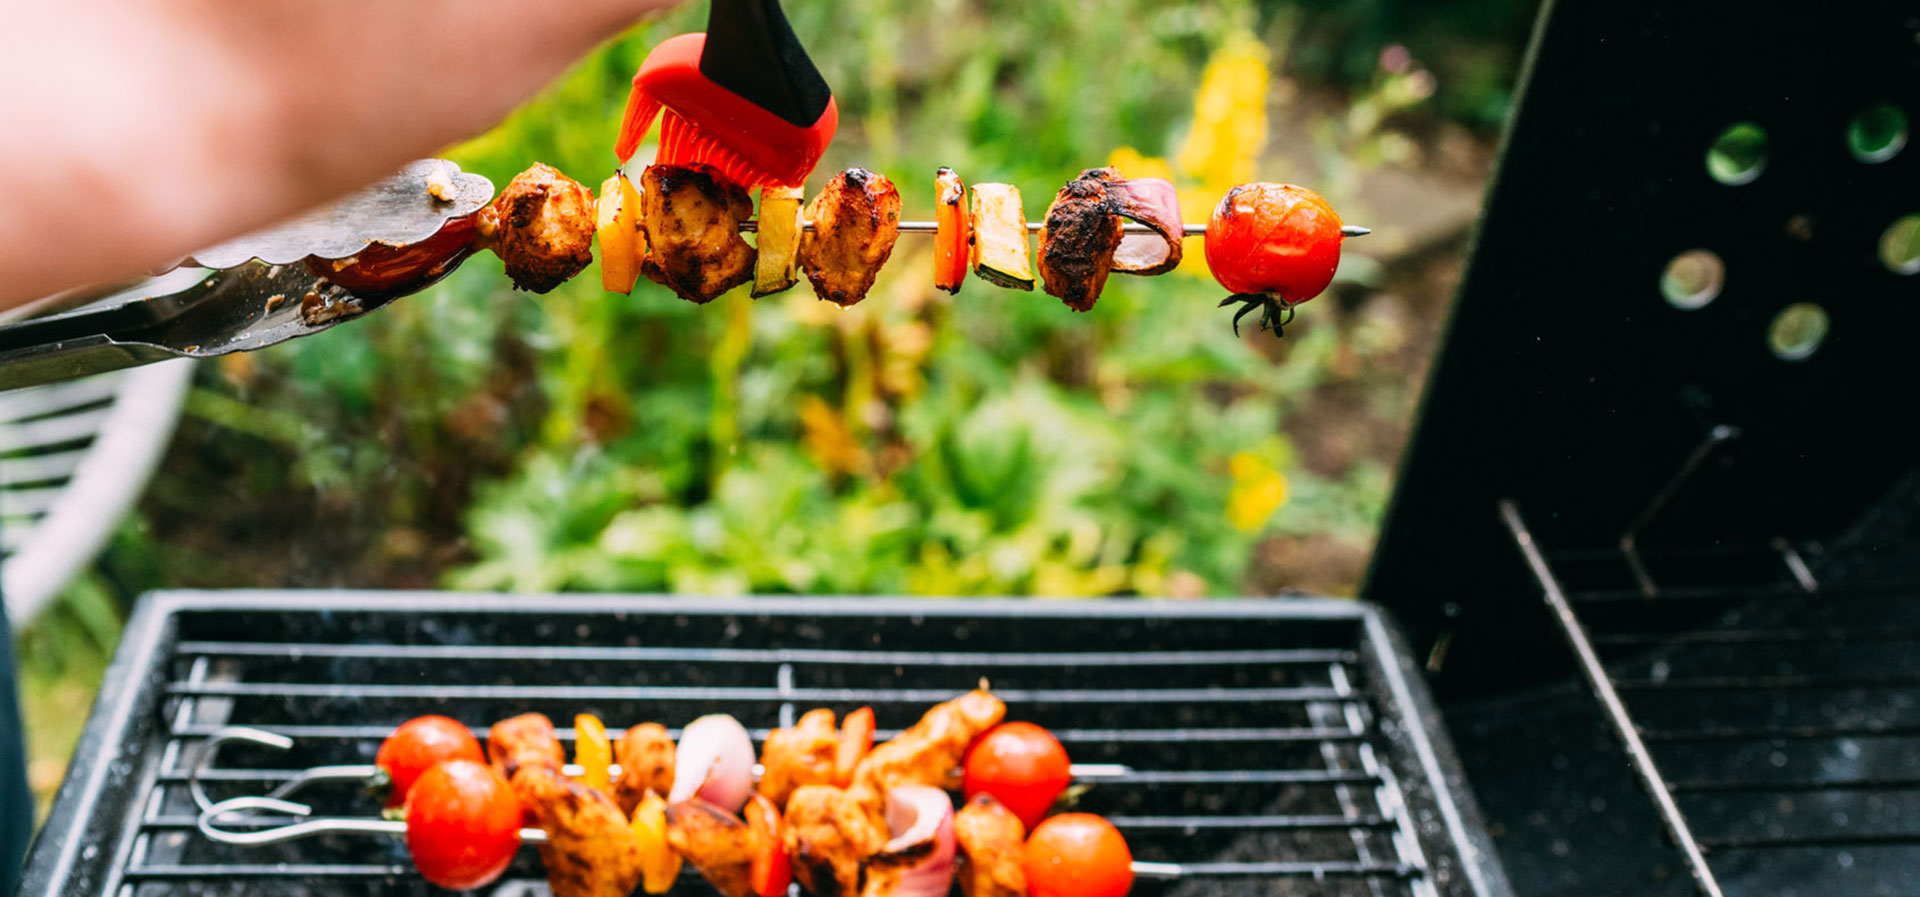 3 Top tips to having a healthy Summer BBQ with exclusive GSN Recipes - GSN